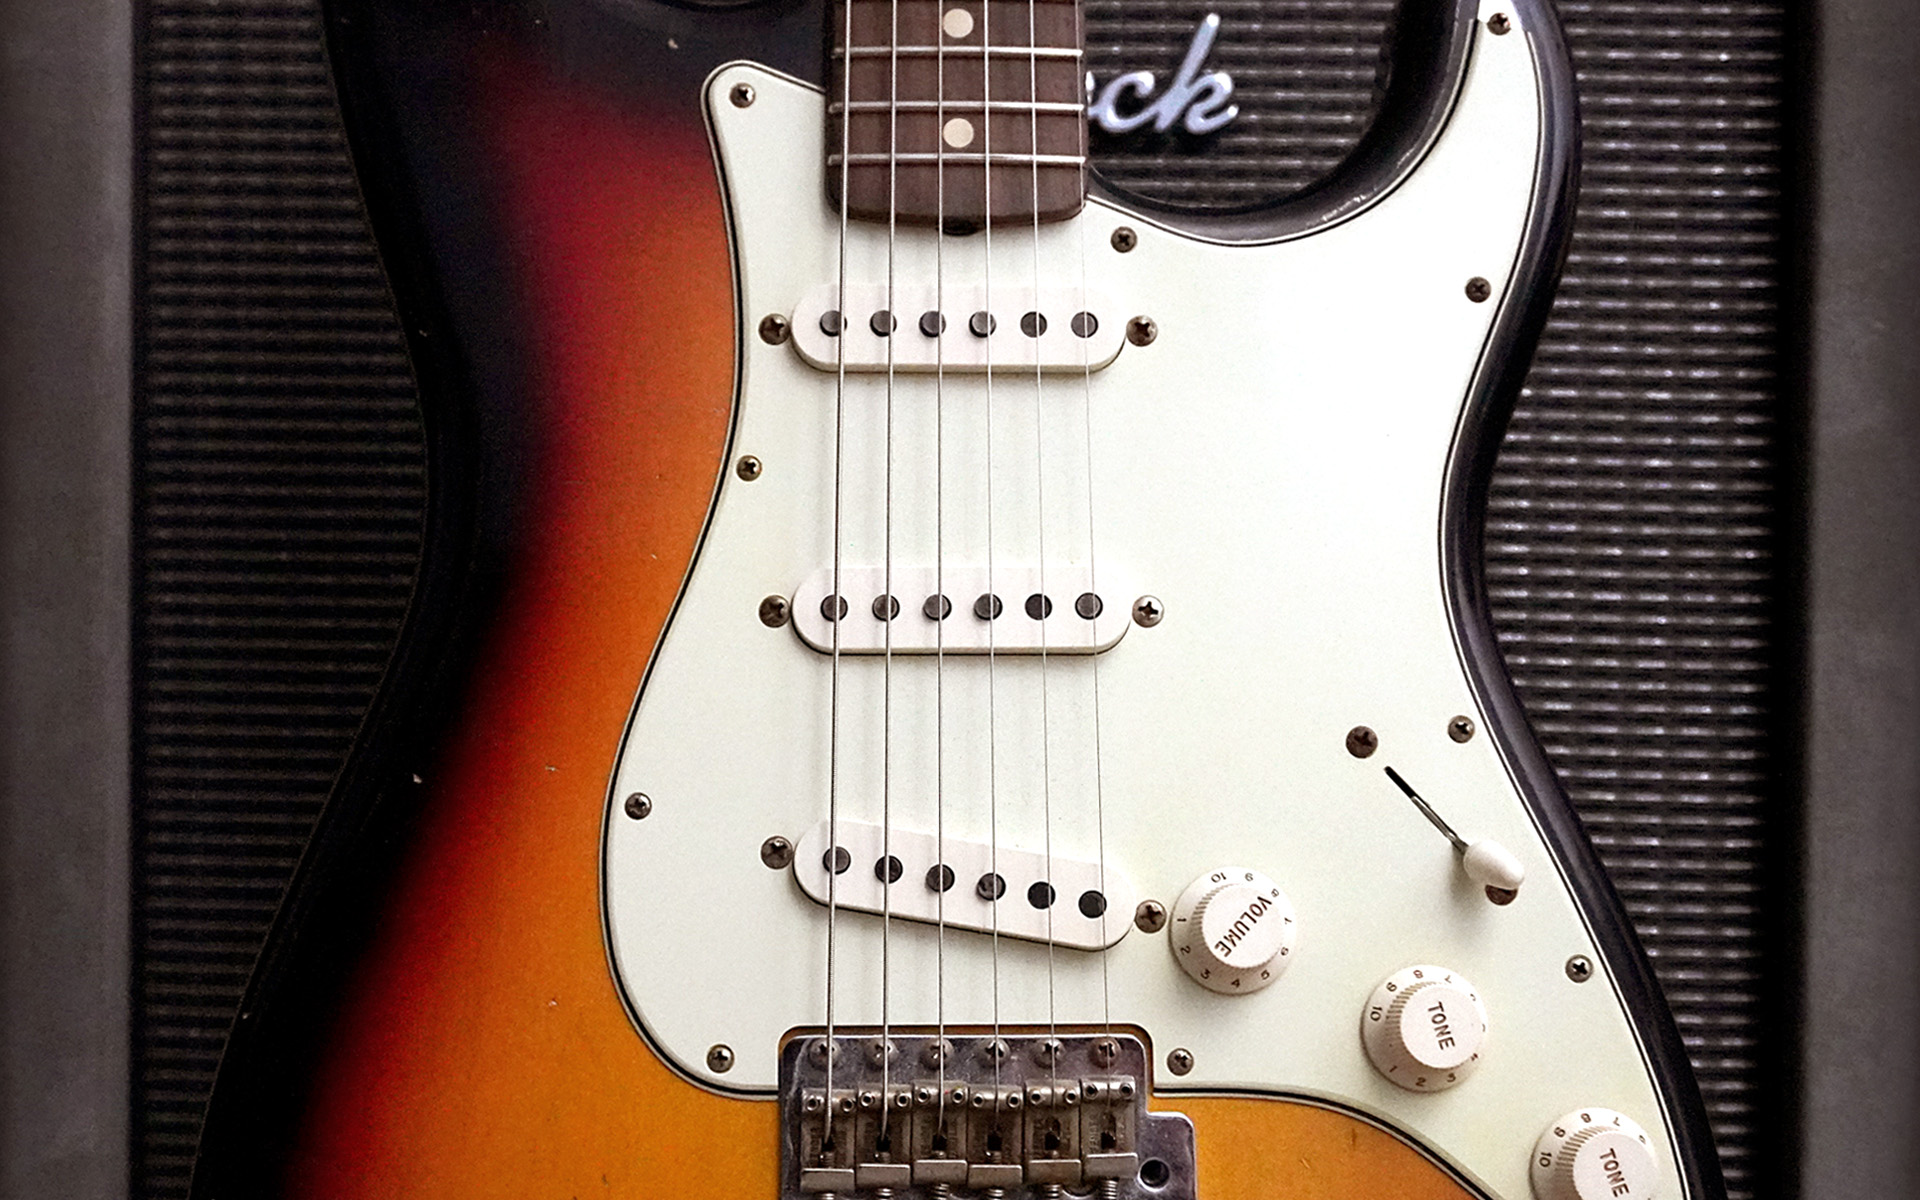 Fender Stratocaster Guitar Pickups Secret: The Magic of the Middle